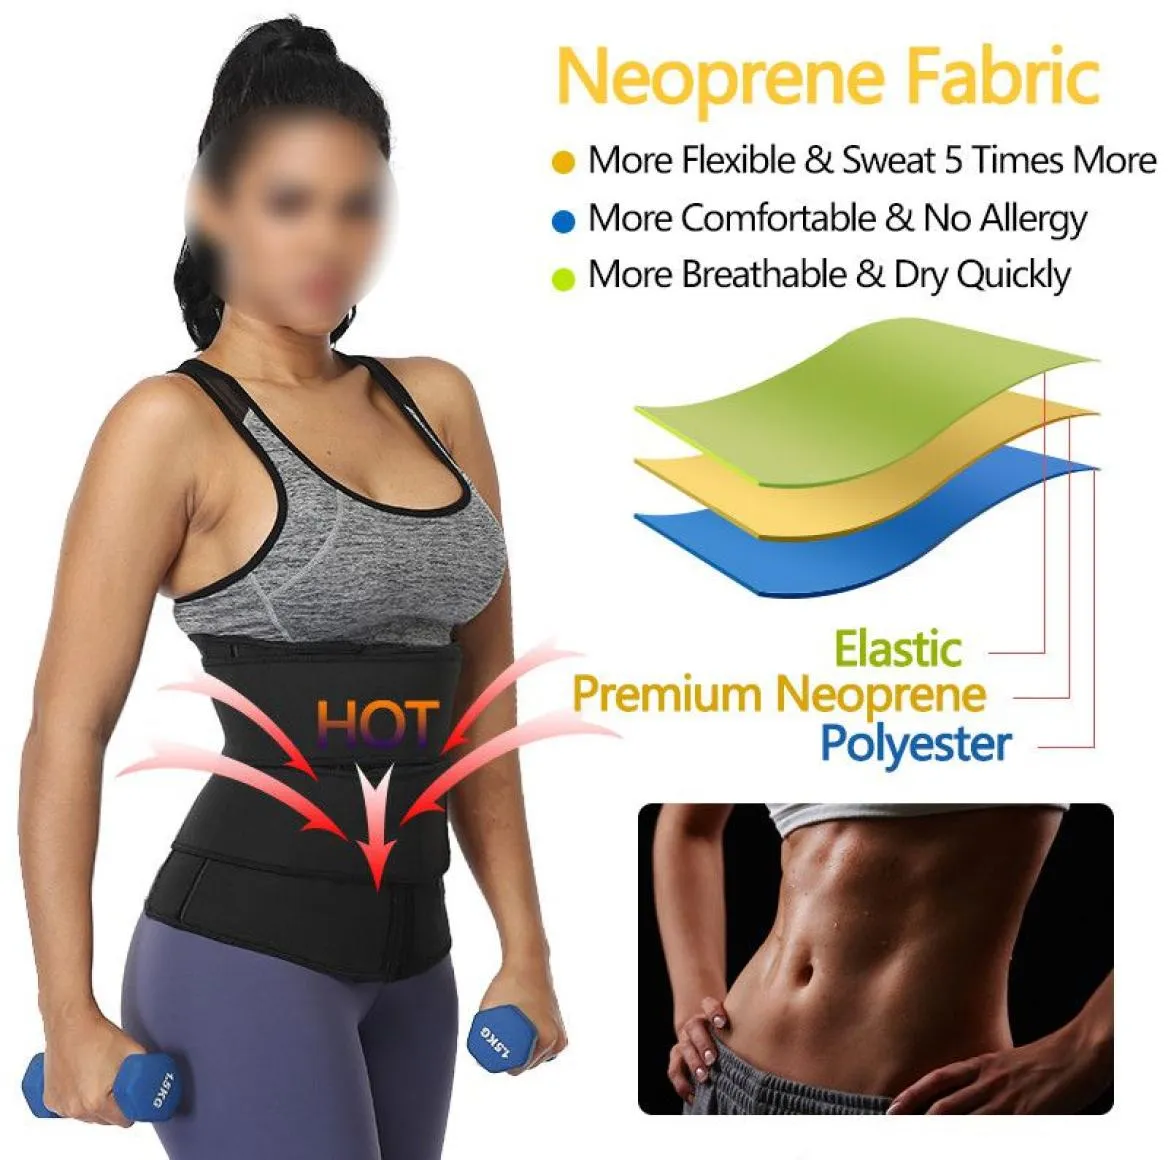 Womens Slimming Abdomen Sweat Belt For Postpartum, Yoga, And Sports  Strengthen Your Waistband With Sweats Band From Aqzn, $18.27